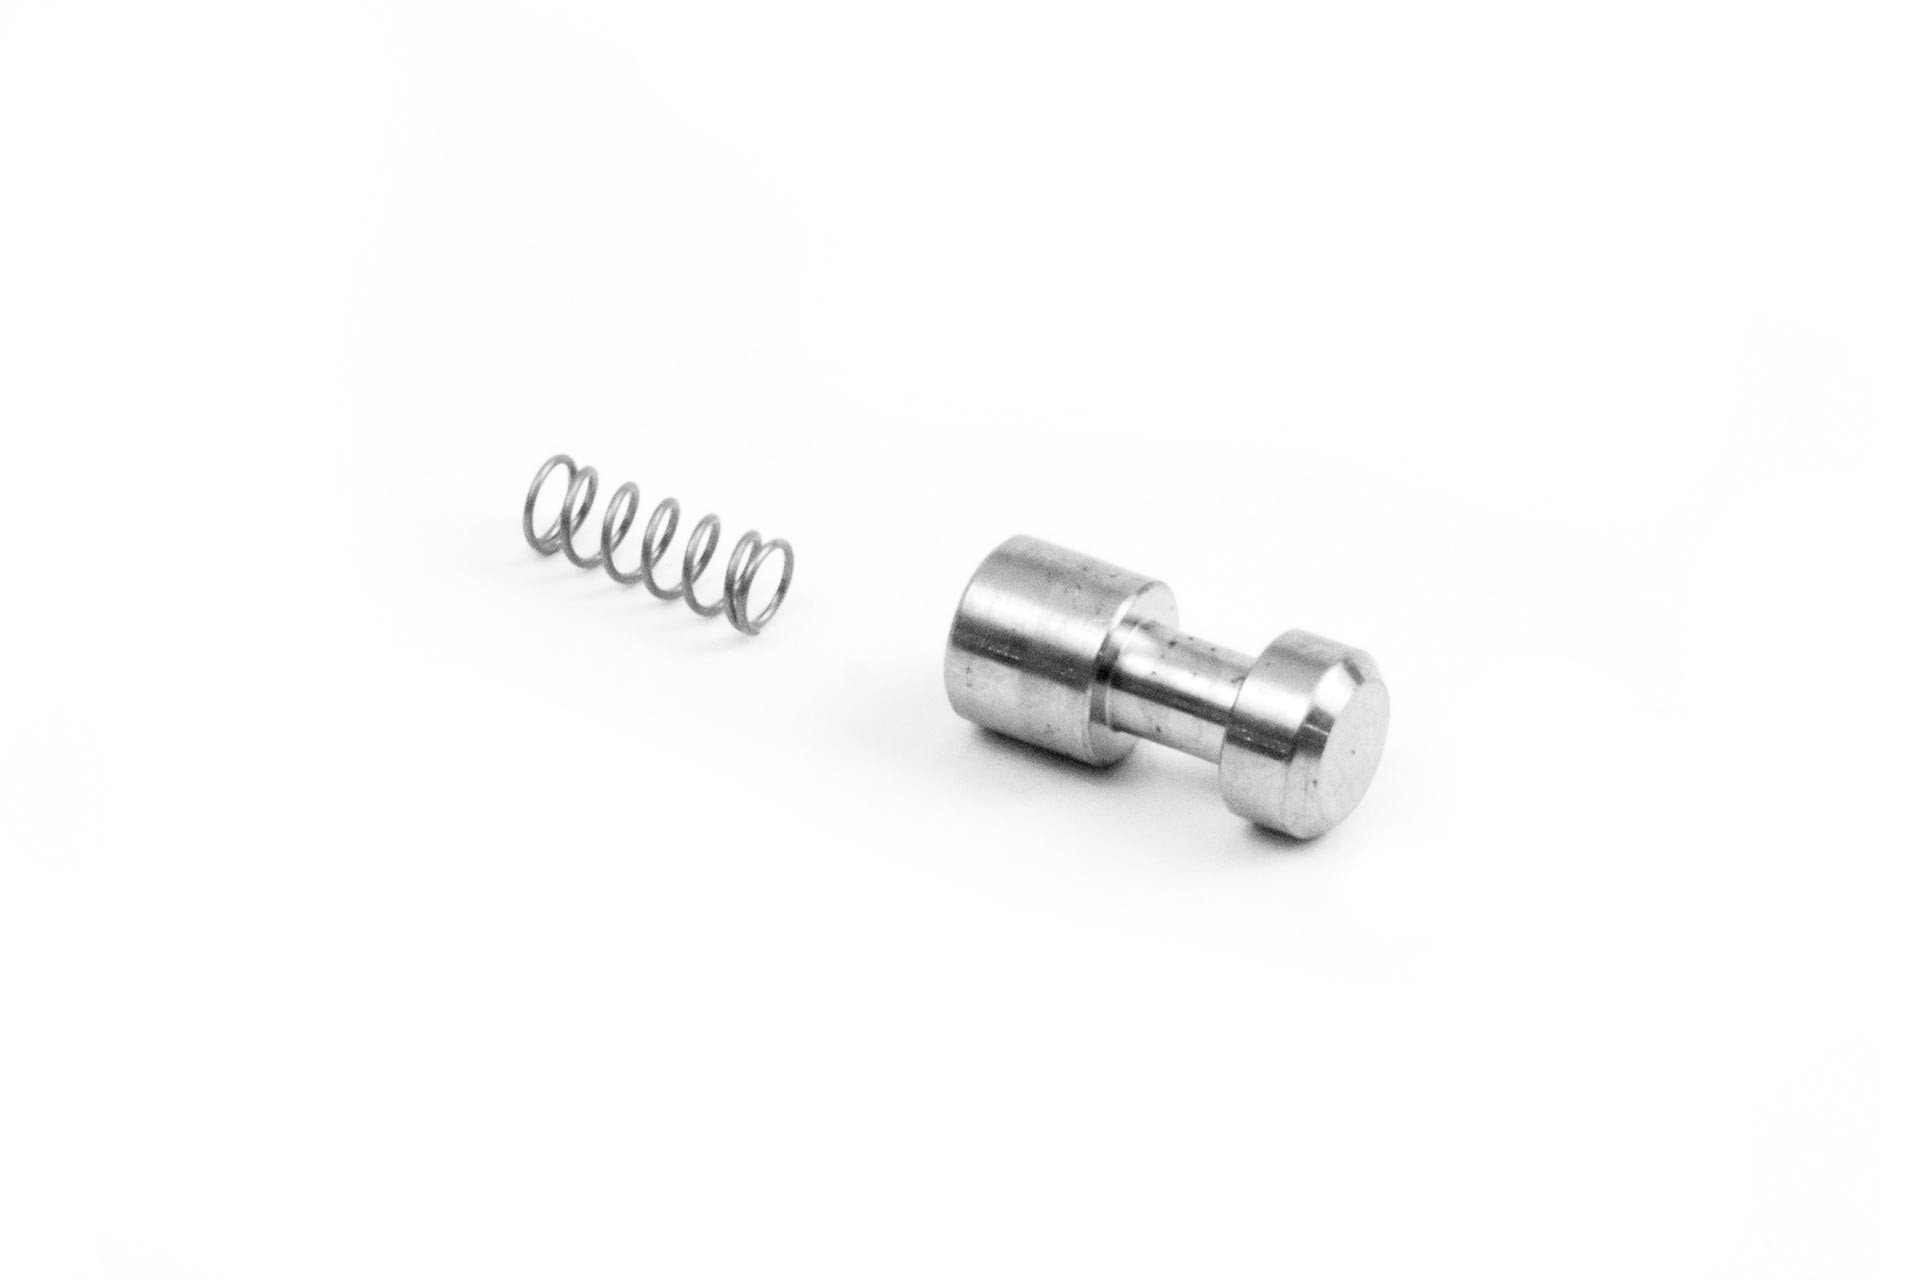 SS FIRING PIN SAFETY ASMBLY - Accessories